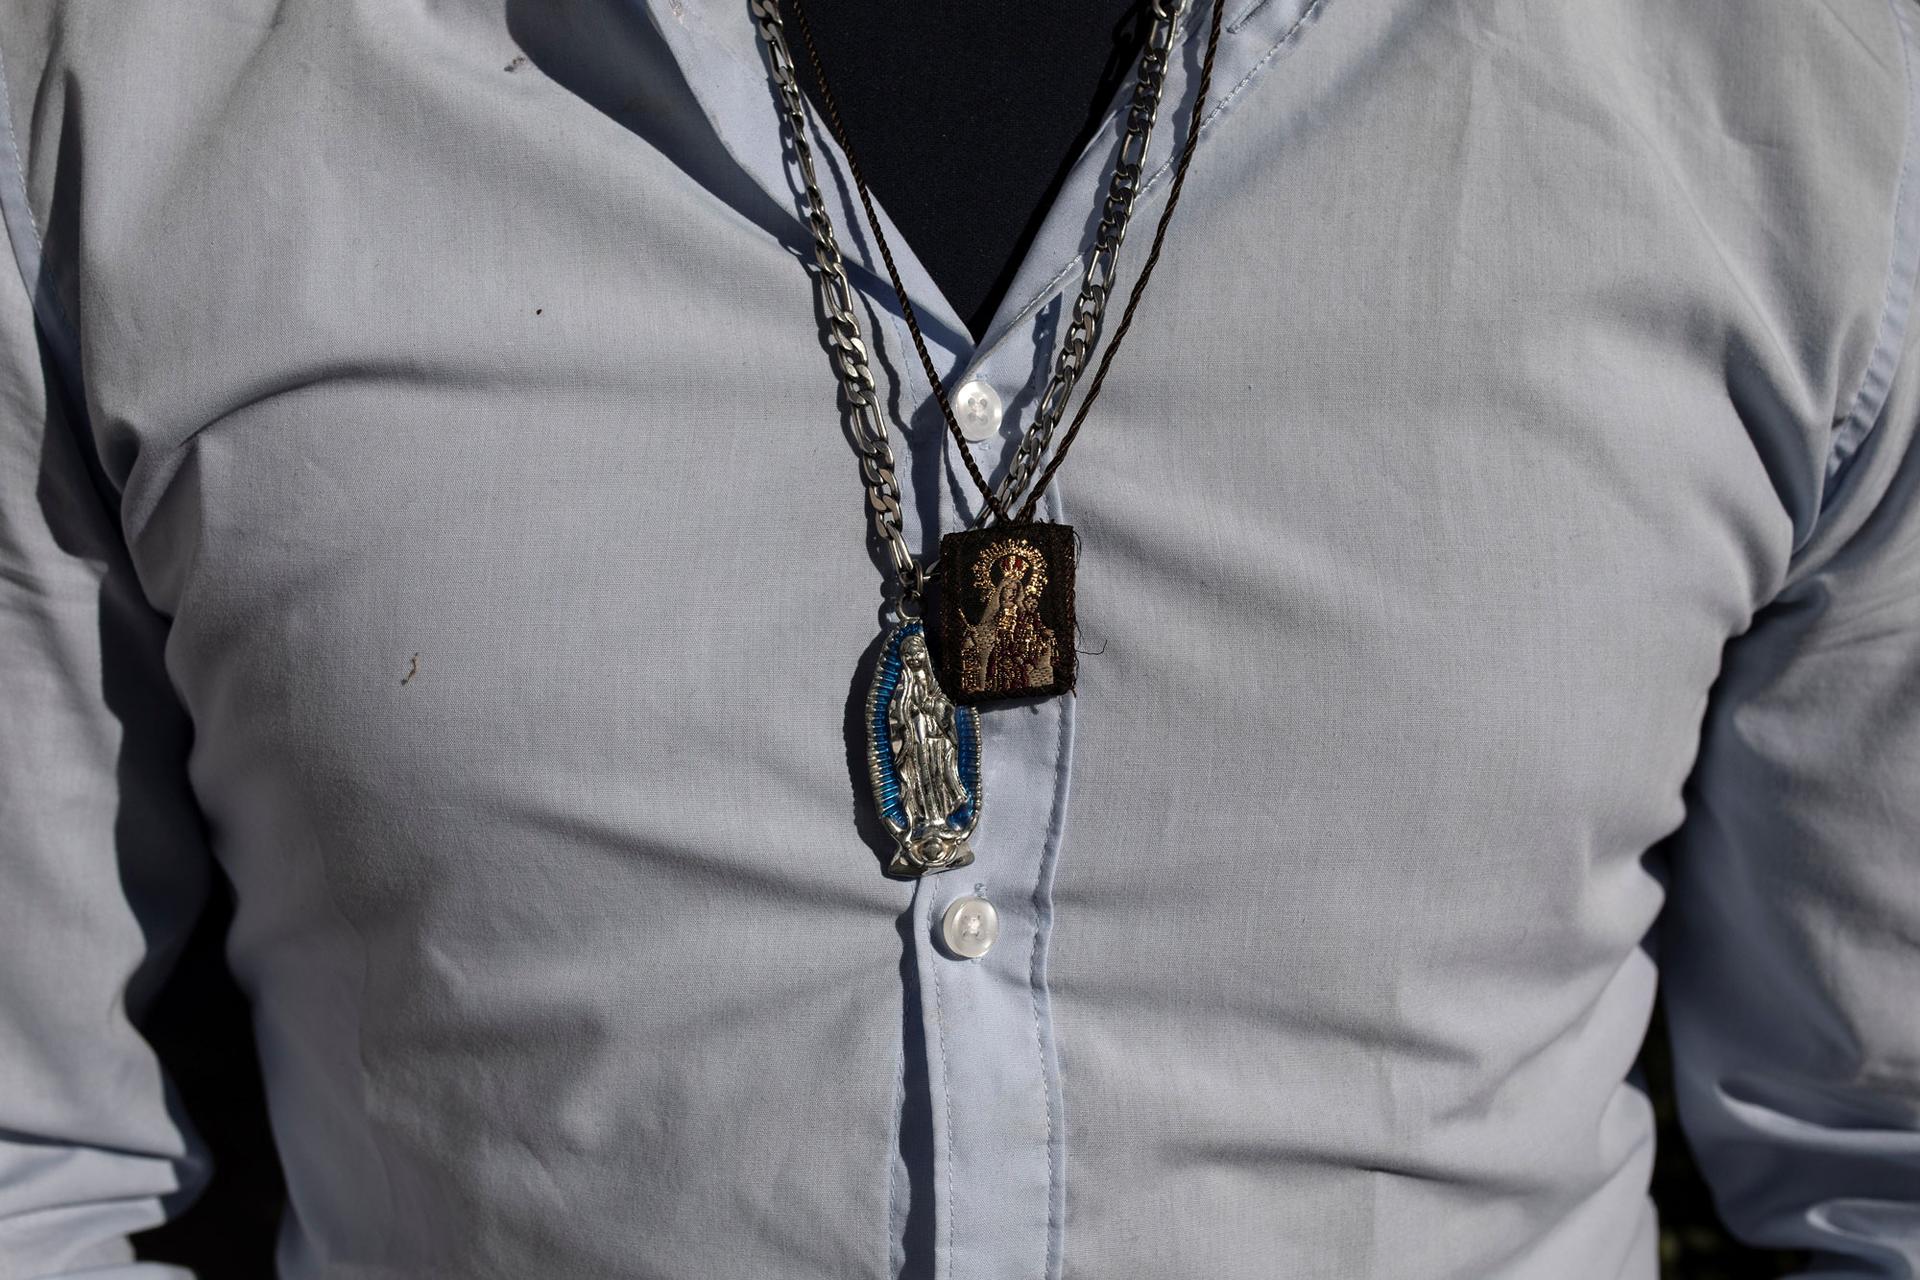 In this close-up photograph, Victor Alfonso in a blue button down shirt, wears charms depicting the Virgin of Guadalupe.